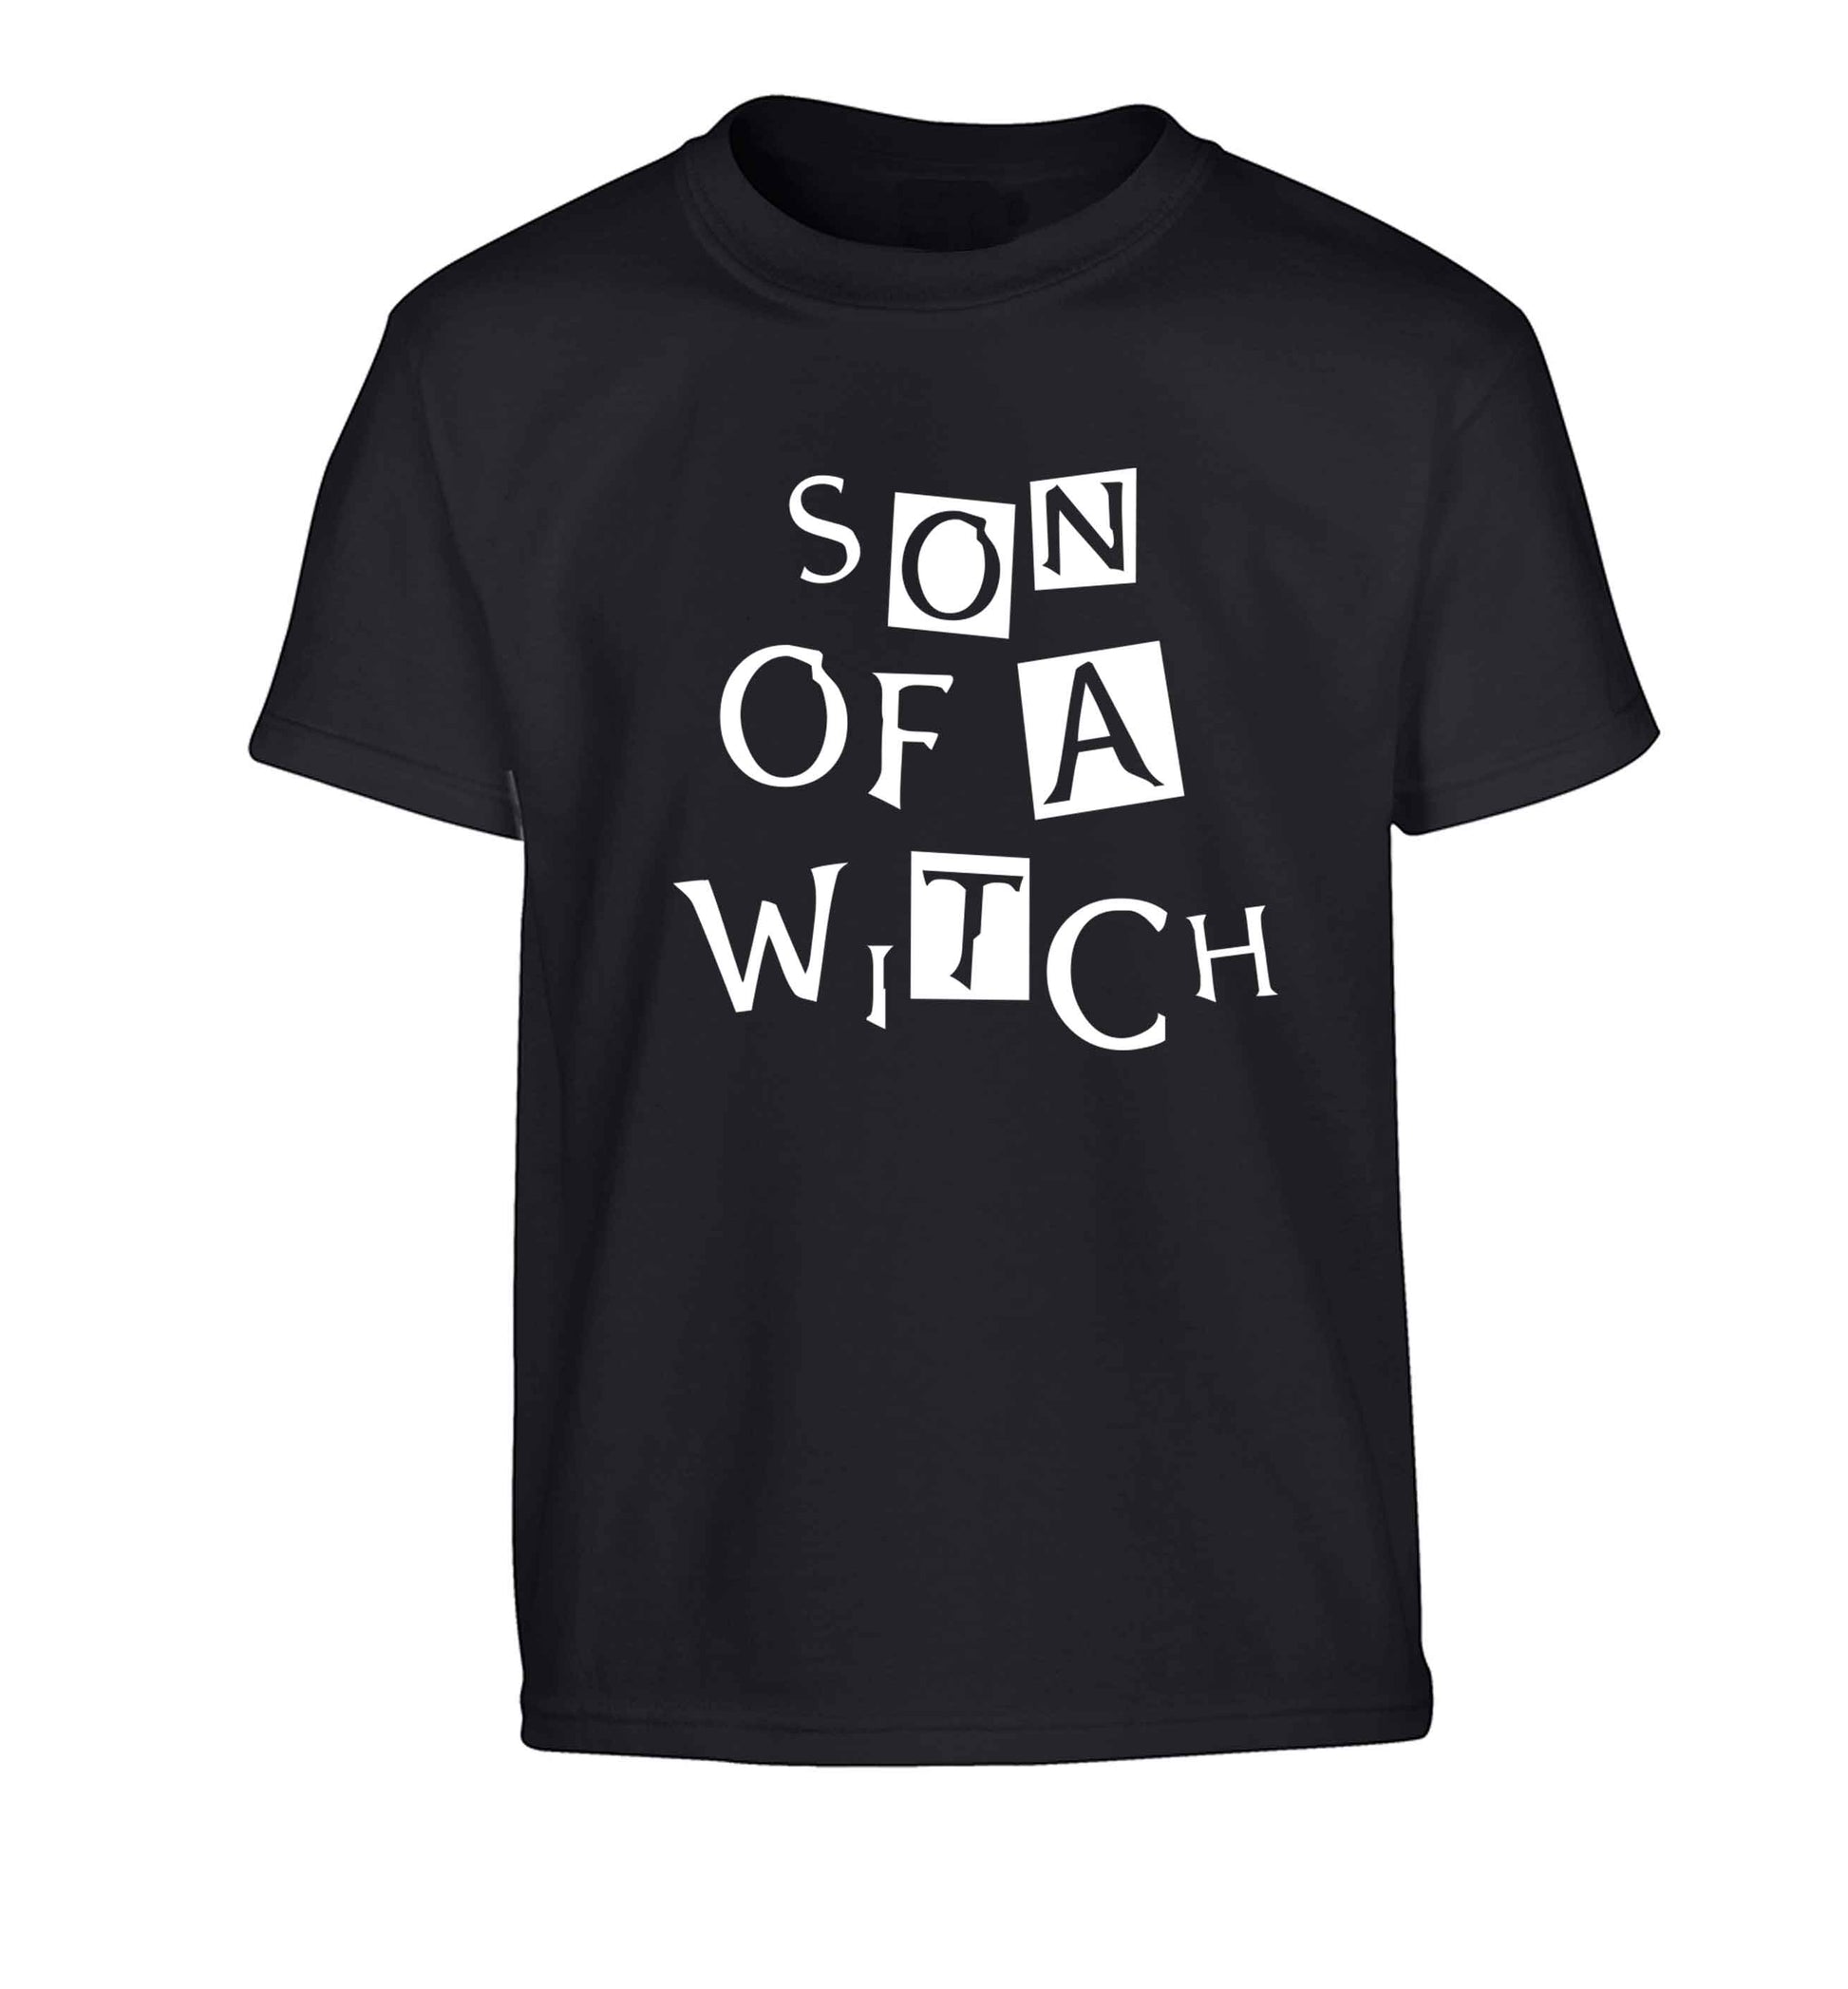 Son of a witch Children's black Tshirt 12-13 Years